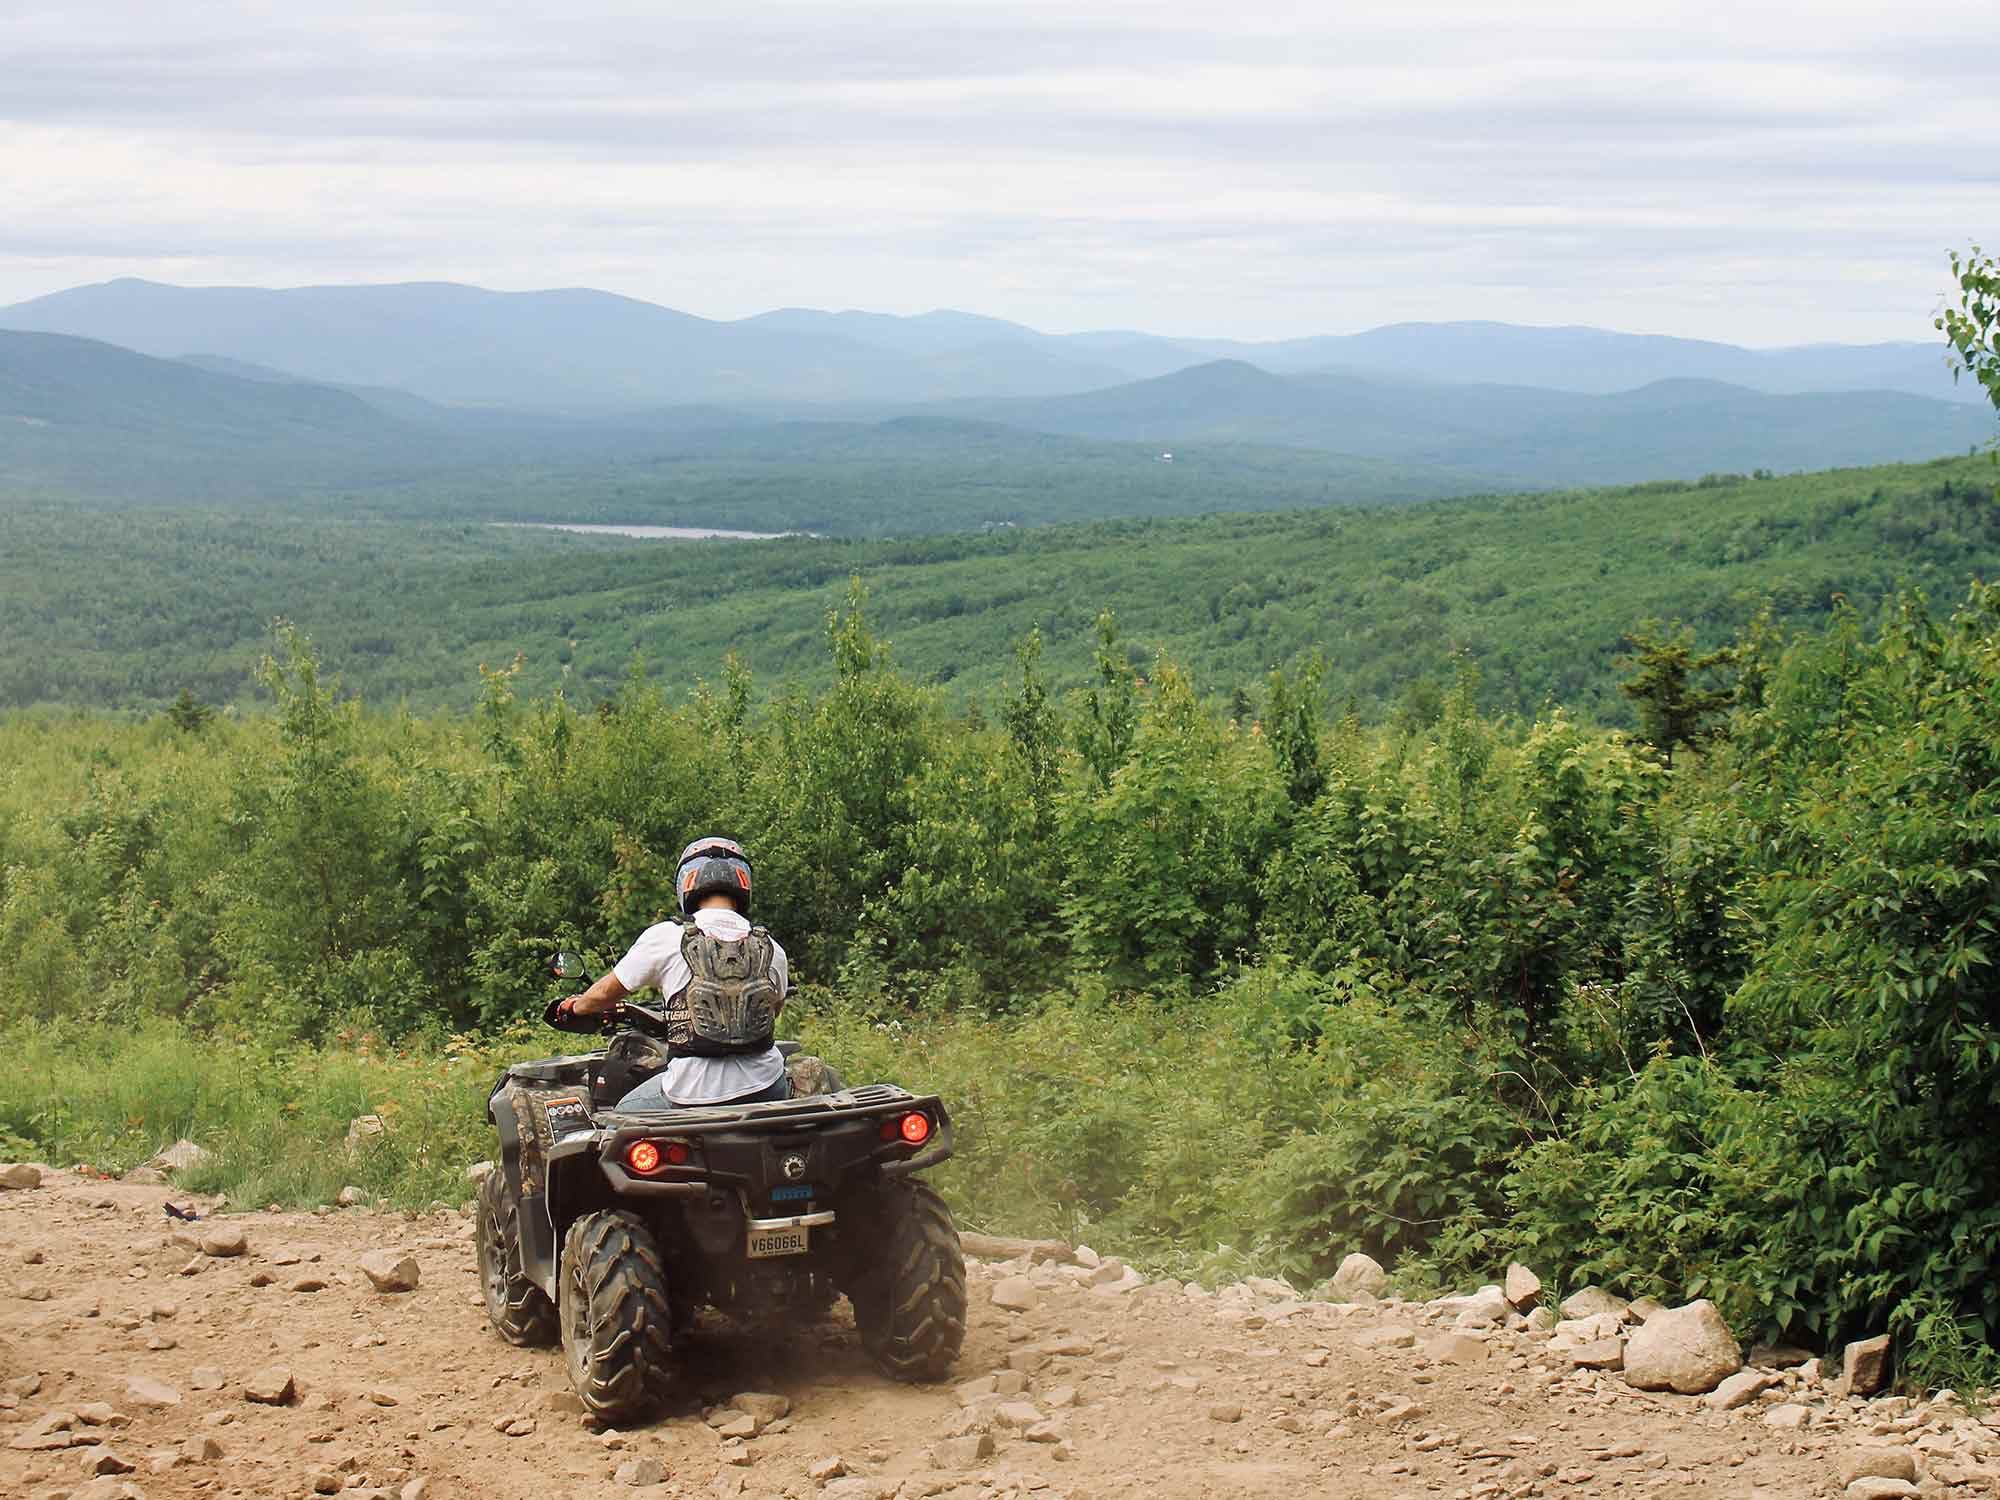 On an ATV, it’s you, your ability, the machine, and the outdoors.